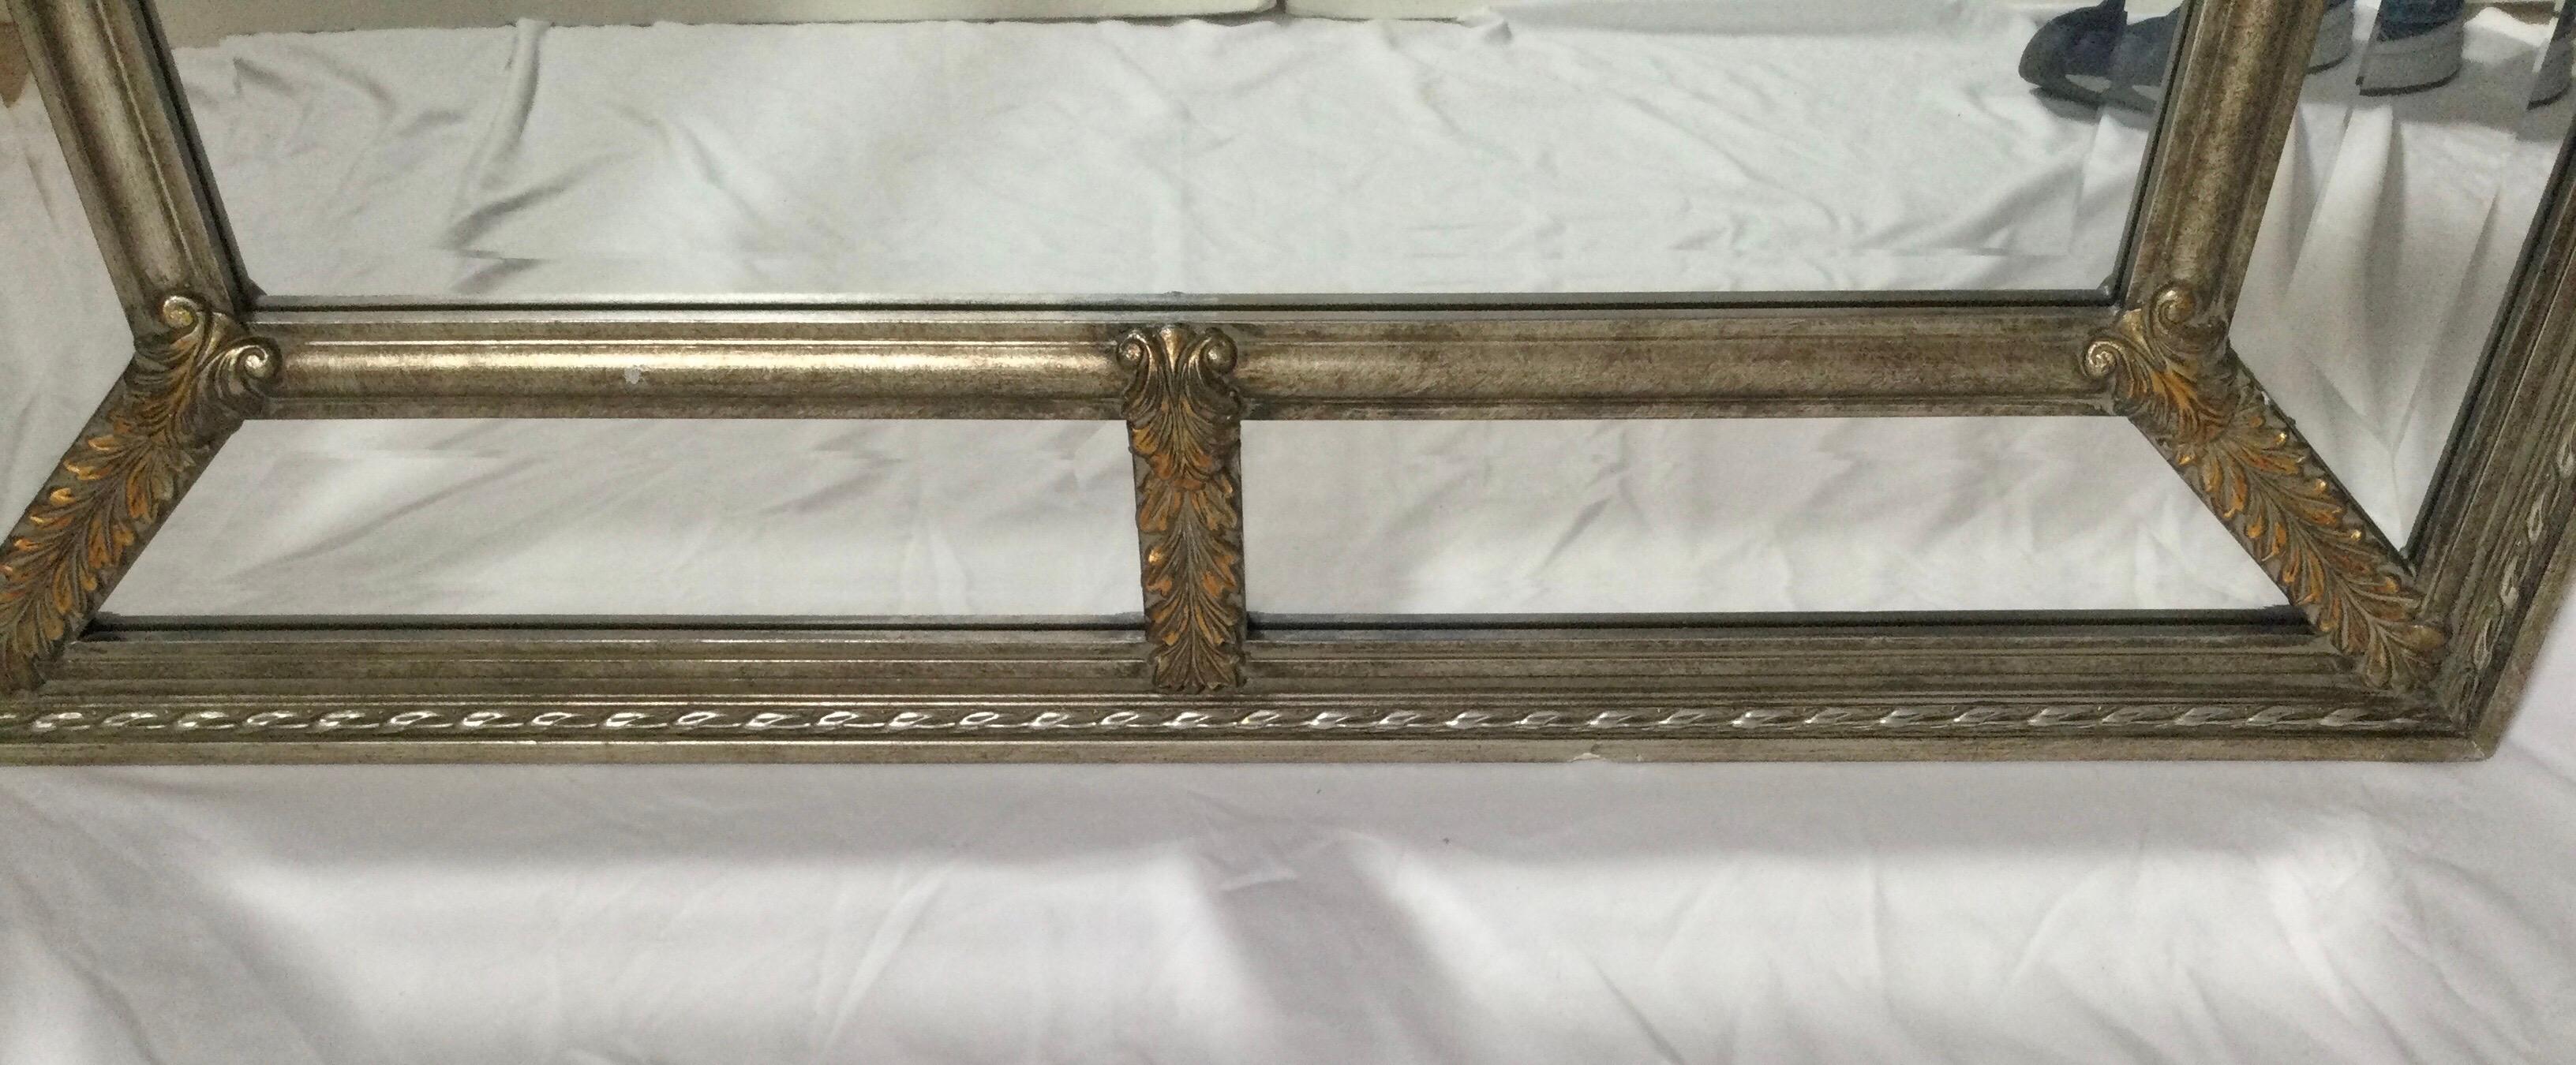 20th Century Silver Gilt Venetian Style Beveled Mirror with Gilt Gold Accents 2